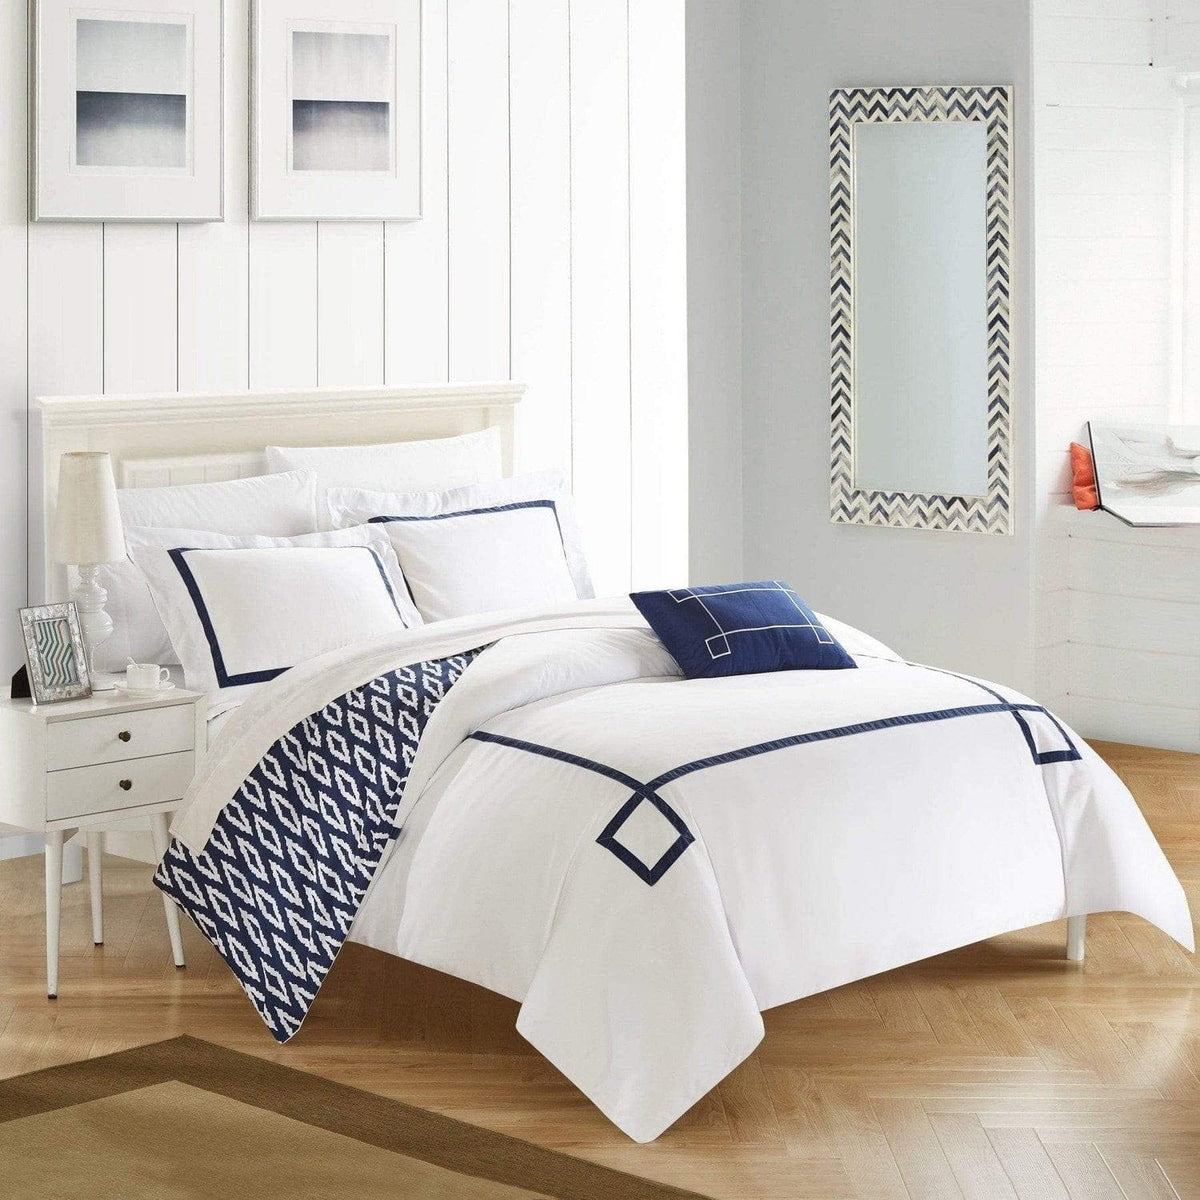 Chic Home Kendall 8 Piece Reversible Duvet Cover Set Navy